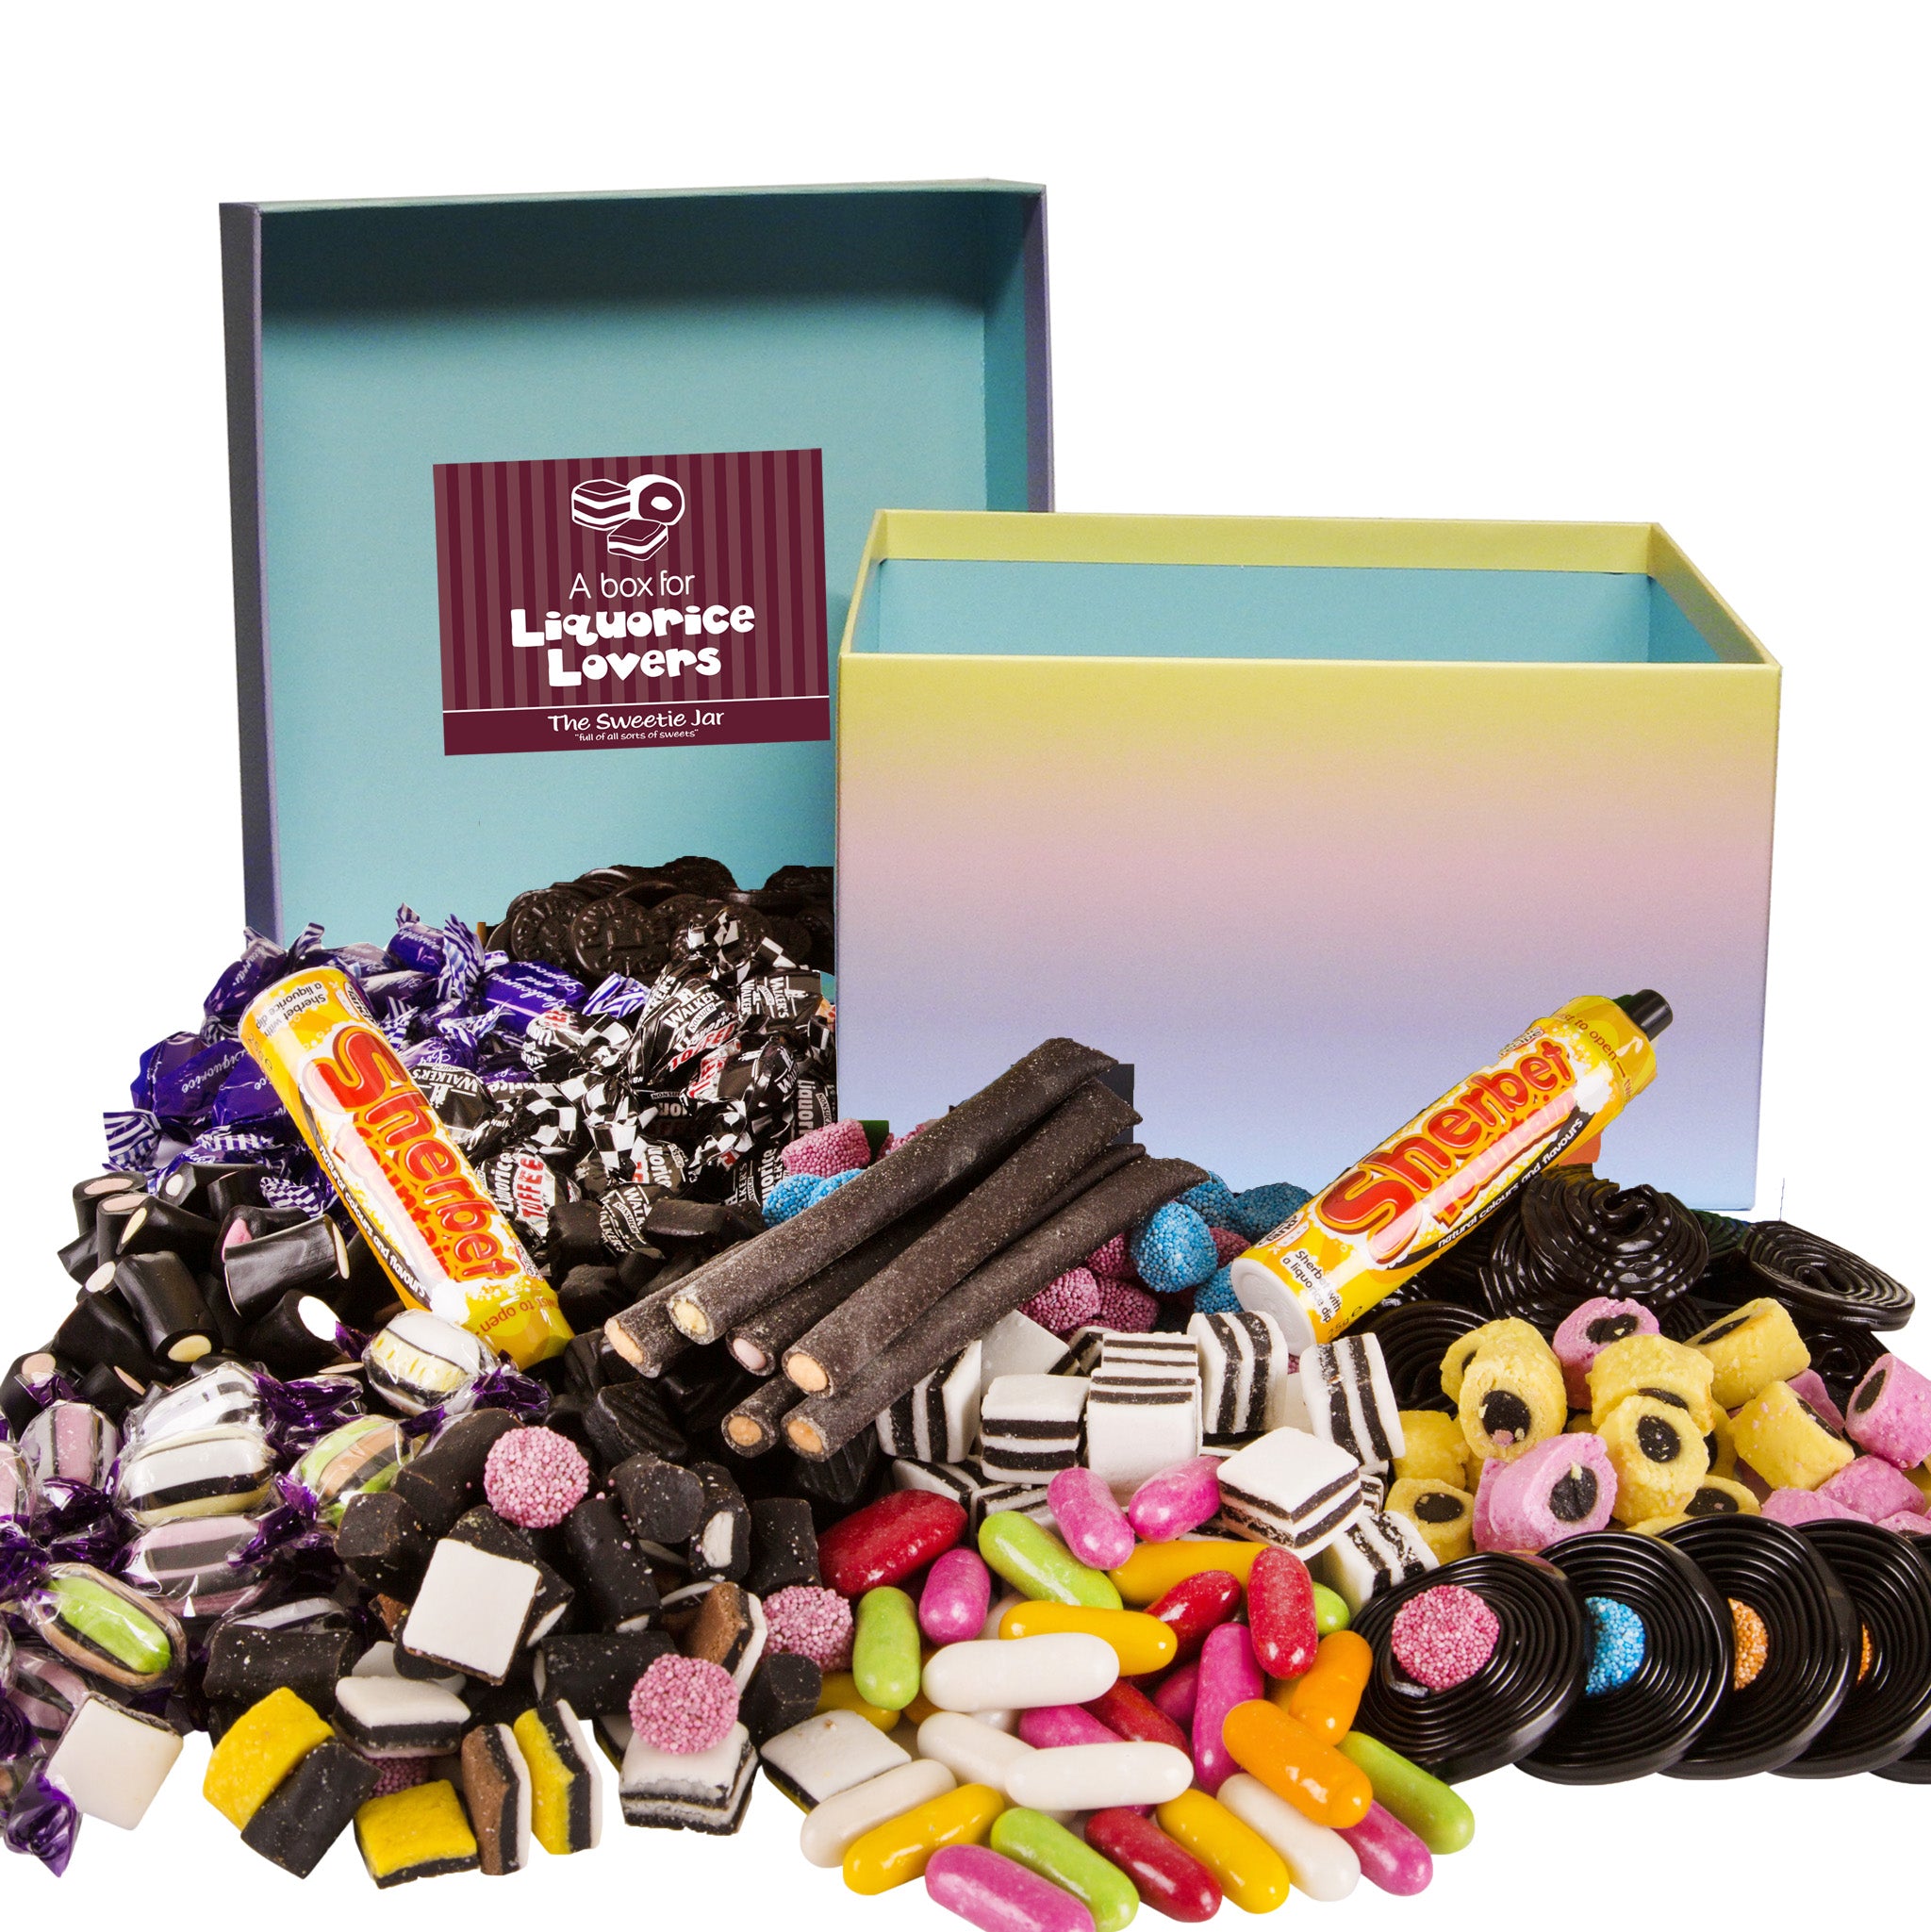 Gift Sweets - Barnetts Boiled Sweets - 125g Dandelion and Burdock, 125g  Rhubarb and Custard, 125g Strawberry & Cream & 125g Peaches and Creme :  Amazon.co.uk: Grocery